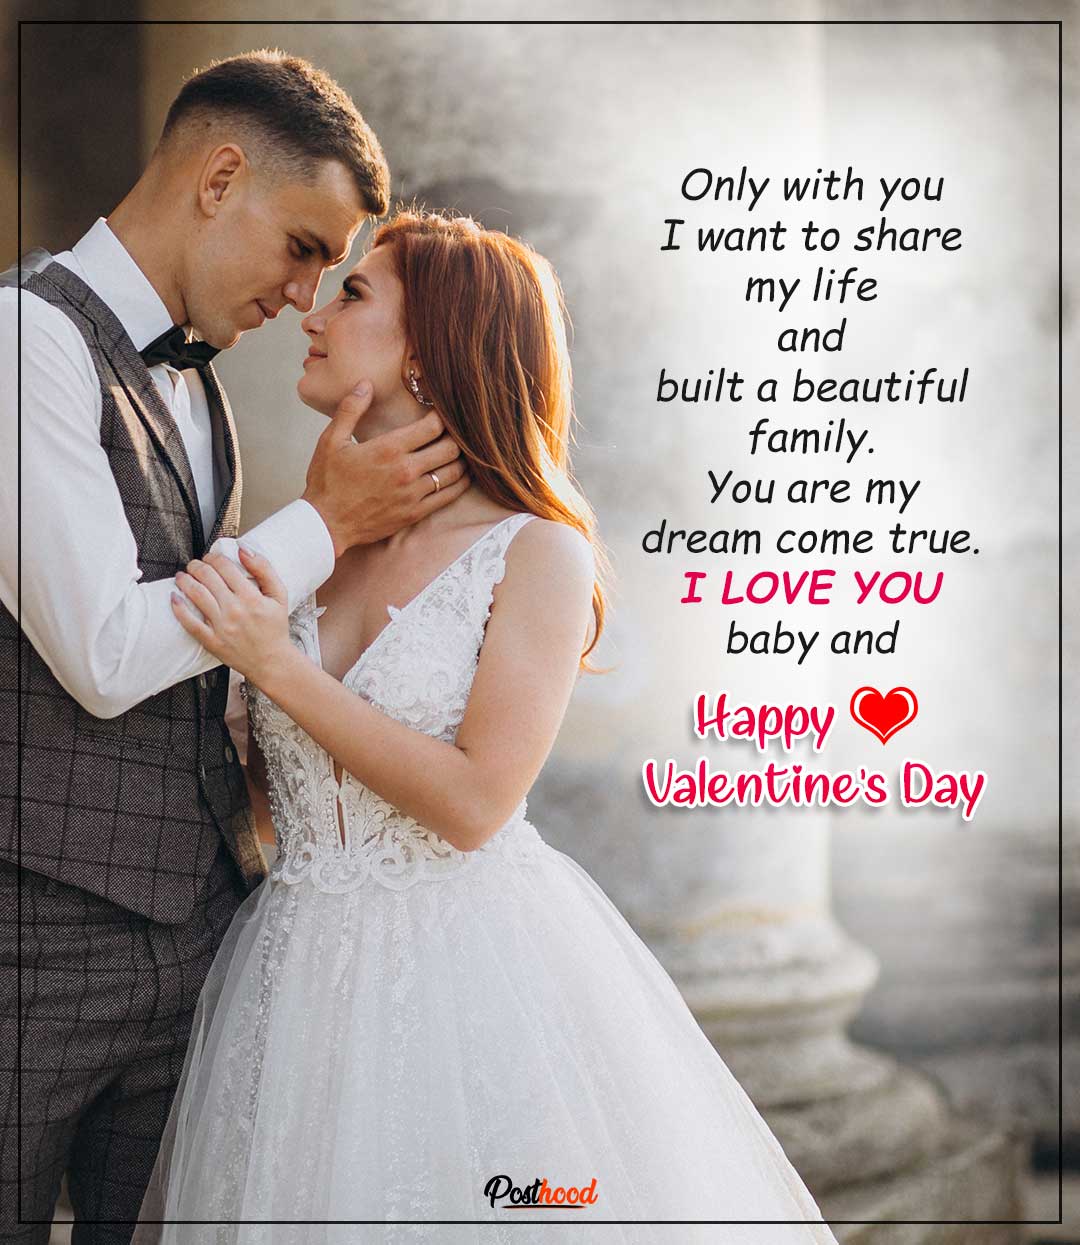 Find 25 cute and romantic Valentine's day messages for her. These collections of sweet Valentine's love messages will renew her love for you.